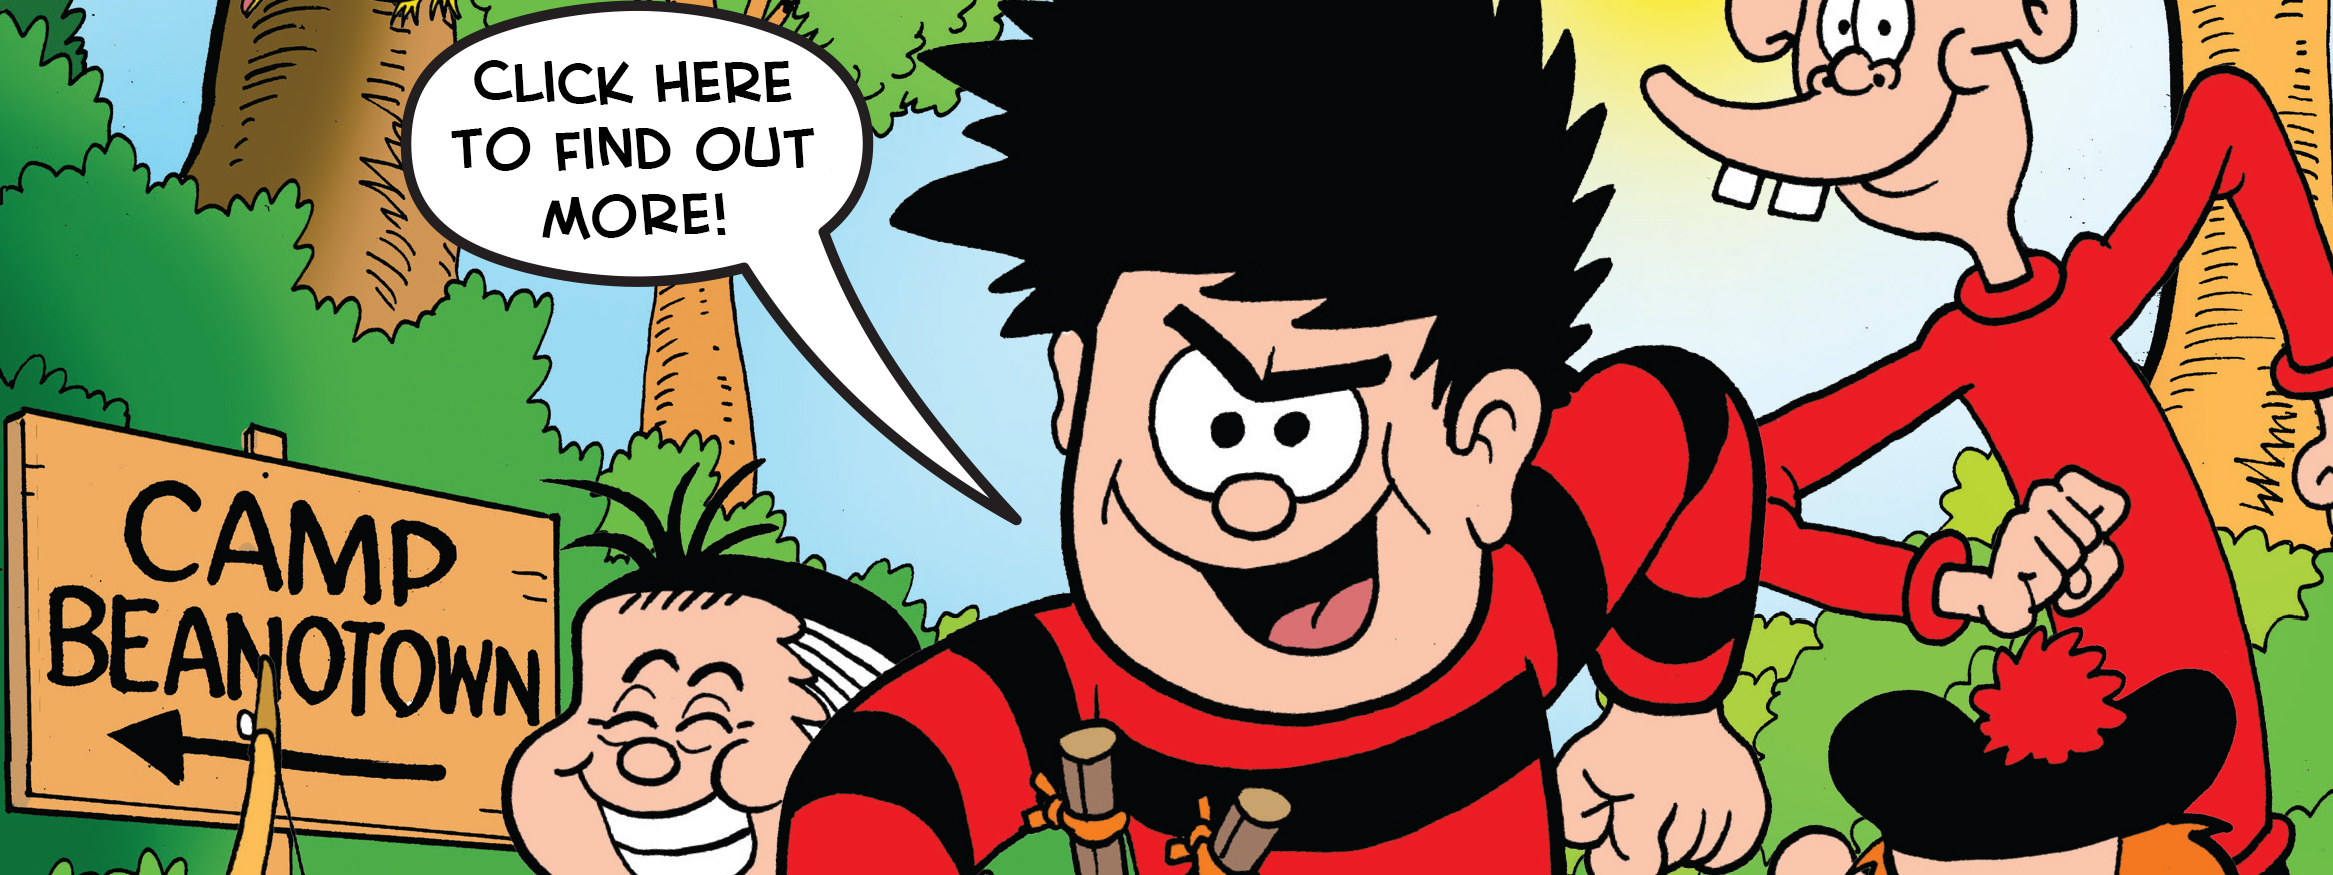 Find out about Beanotown Summer Camp by getting your own copy!